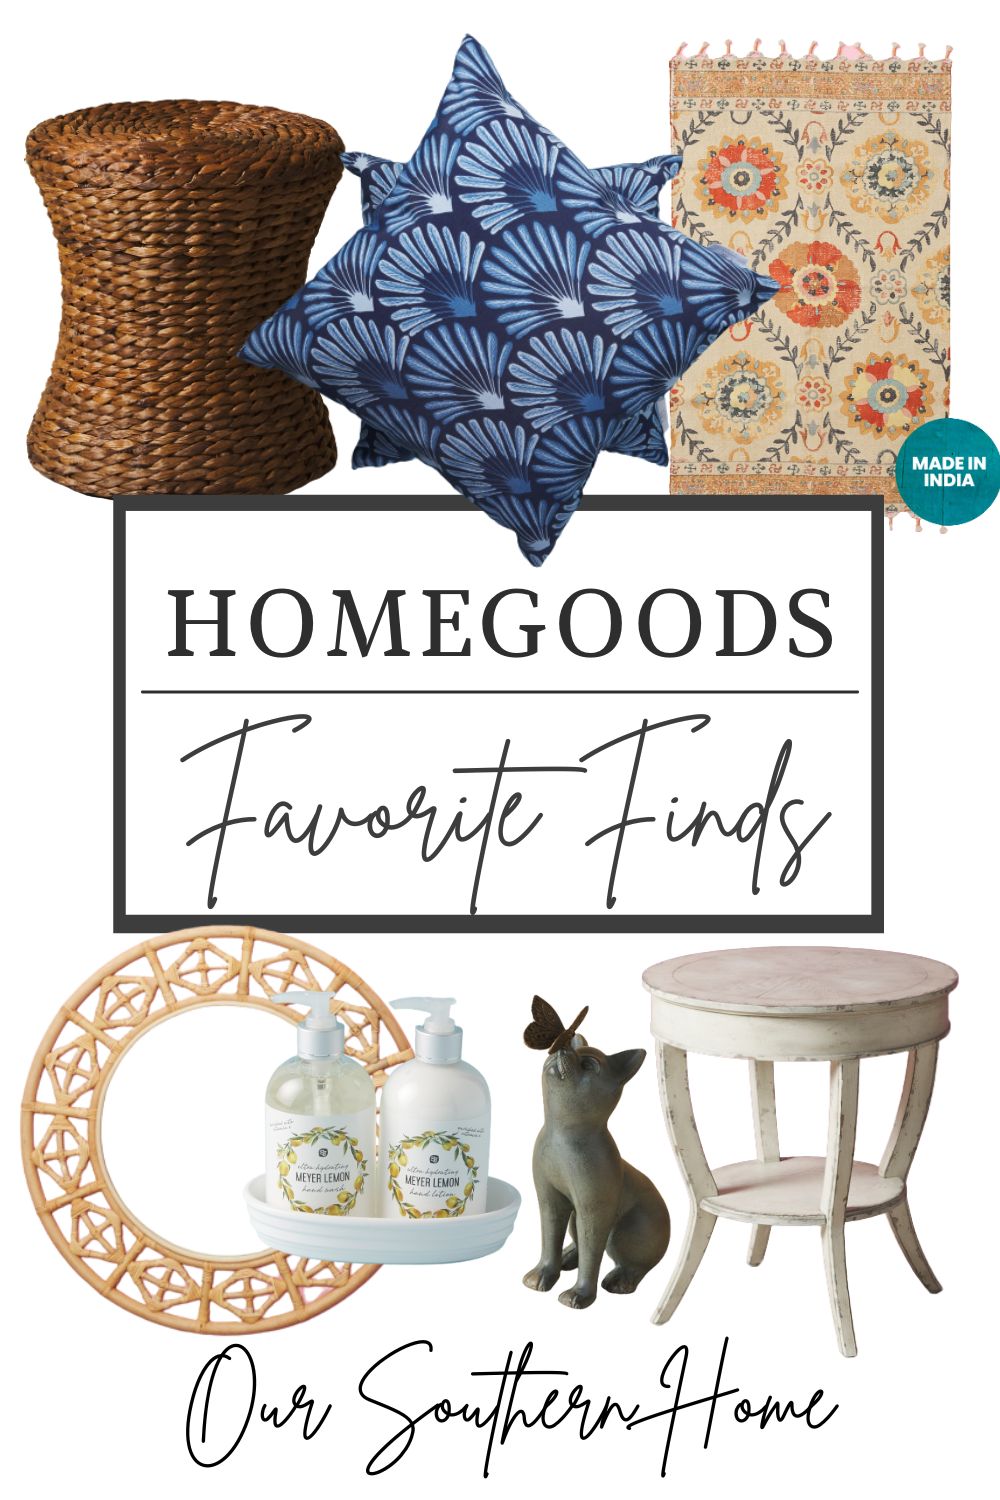 HomeGoods: “We're still trying to figure out the home trend